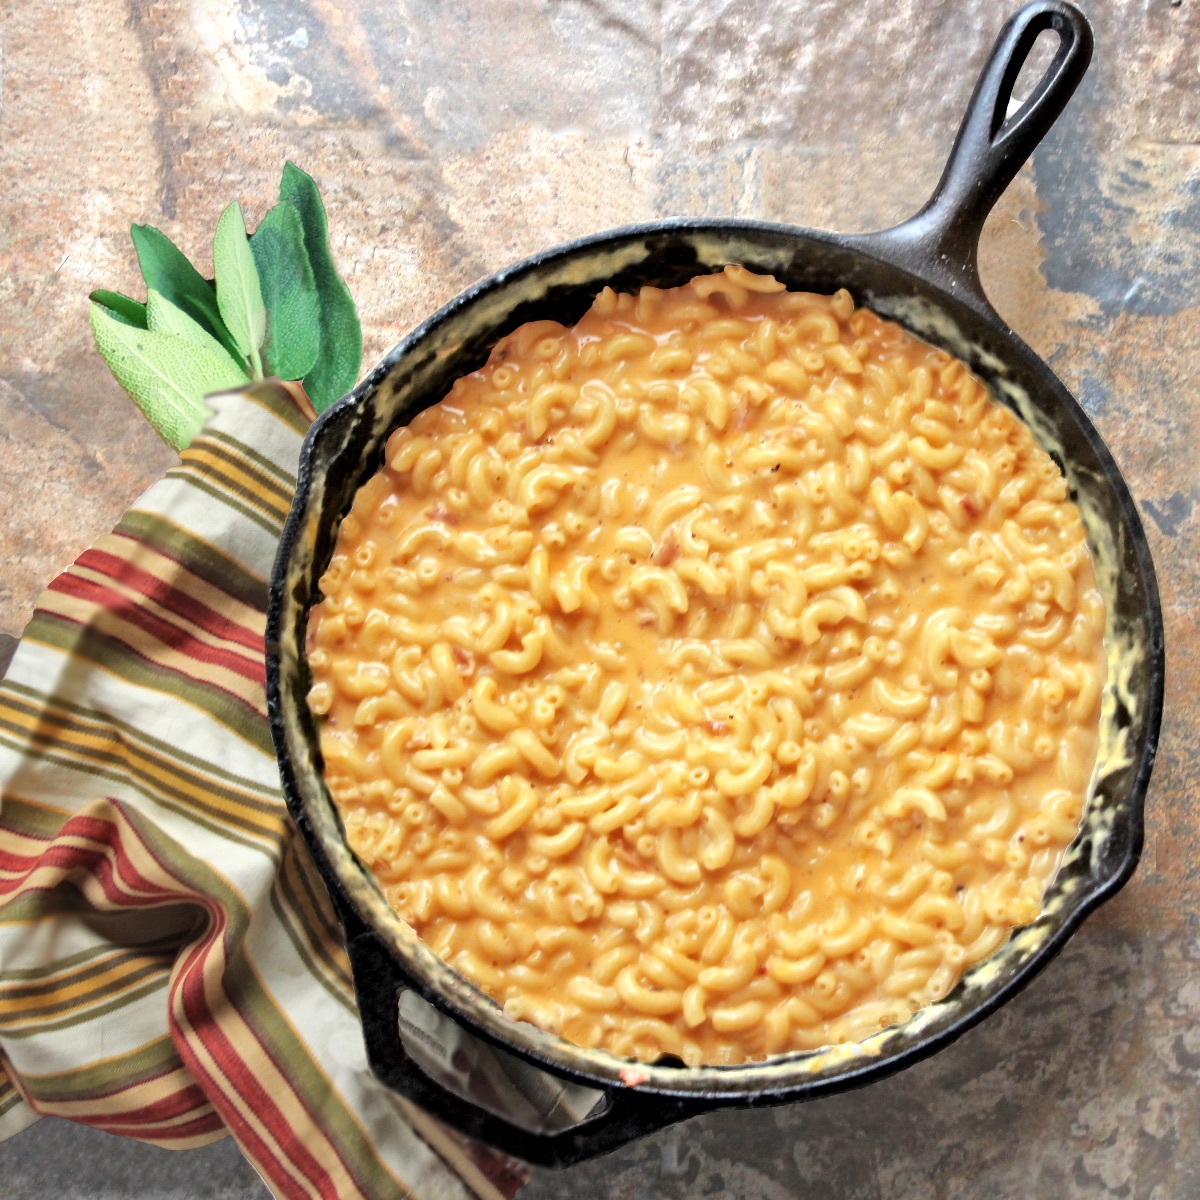 Creamy One-Pot Macaroni and Cheese in a cast-iron skillet, next to a striped cloth and a bunch of sage. This macaroni and cheese is creamy and decadent, but without a roux or actual cream. Just loads of cheesy flavor!